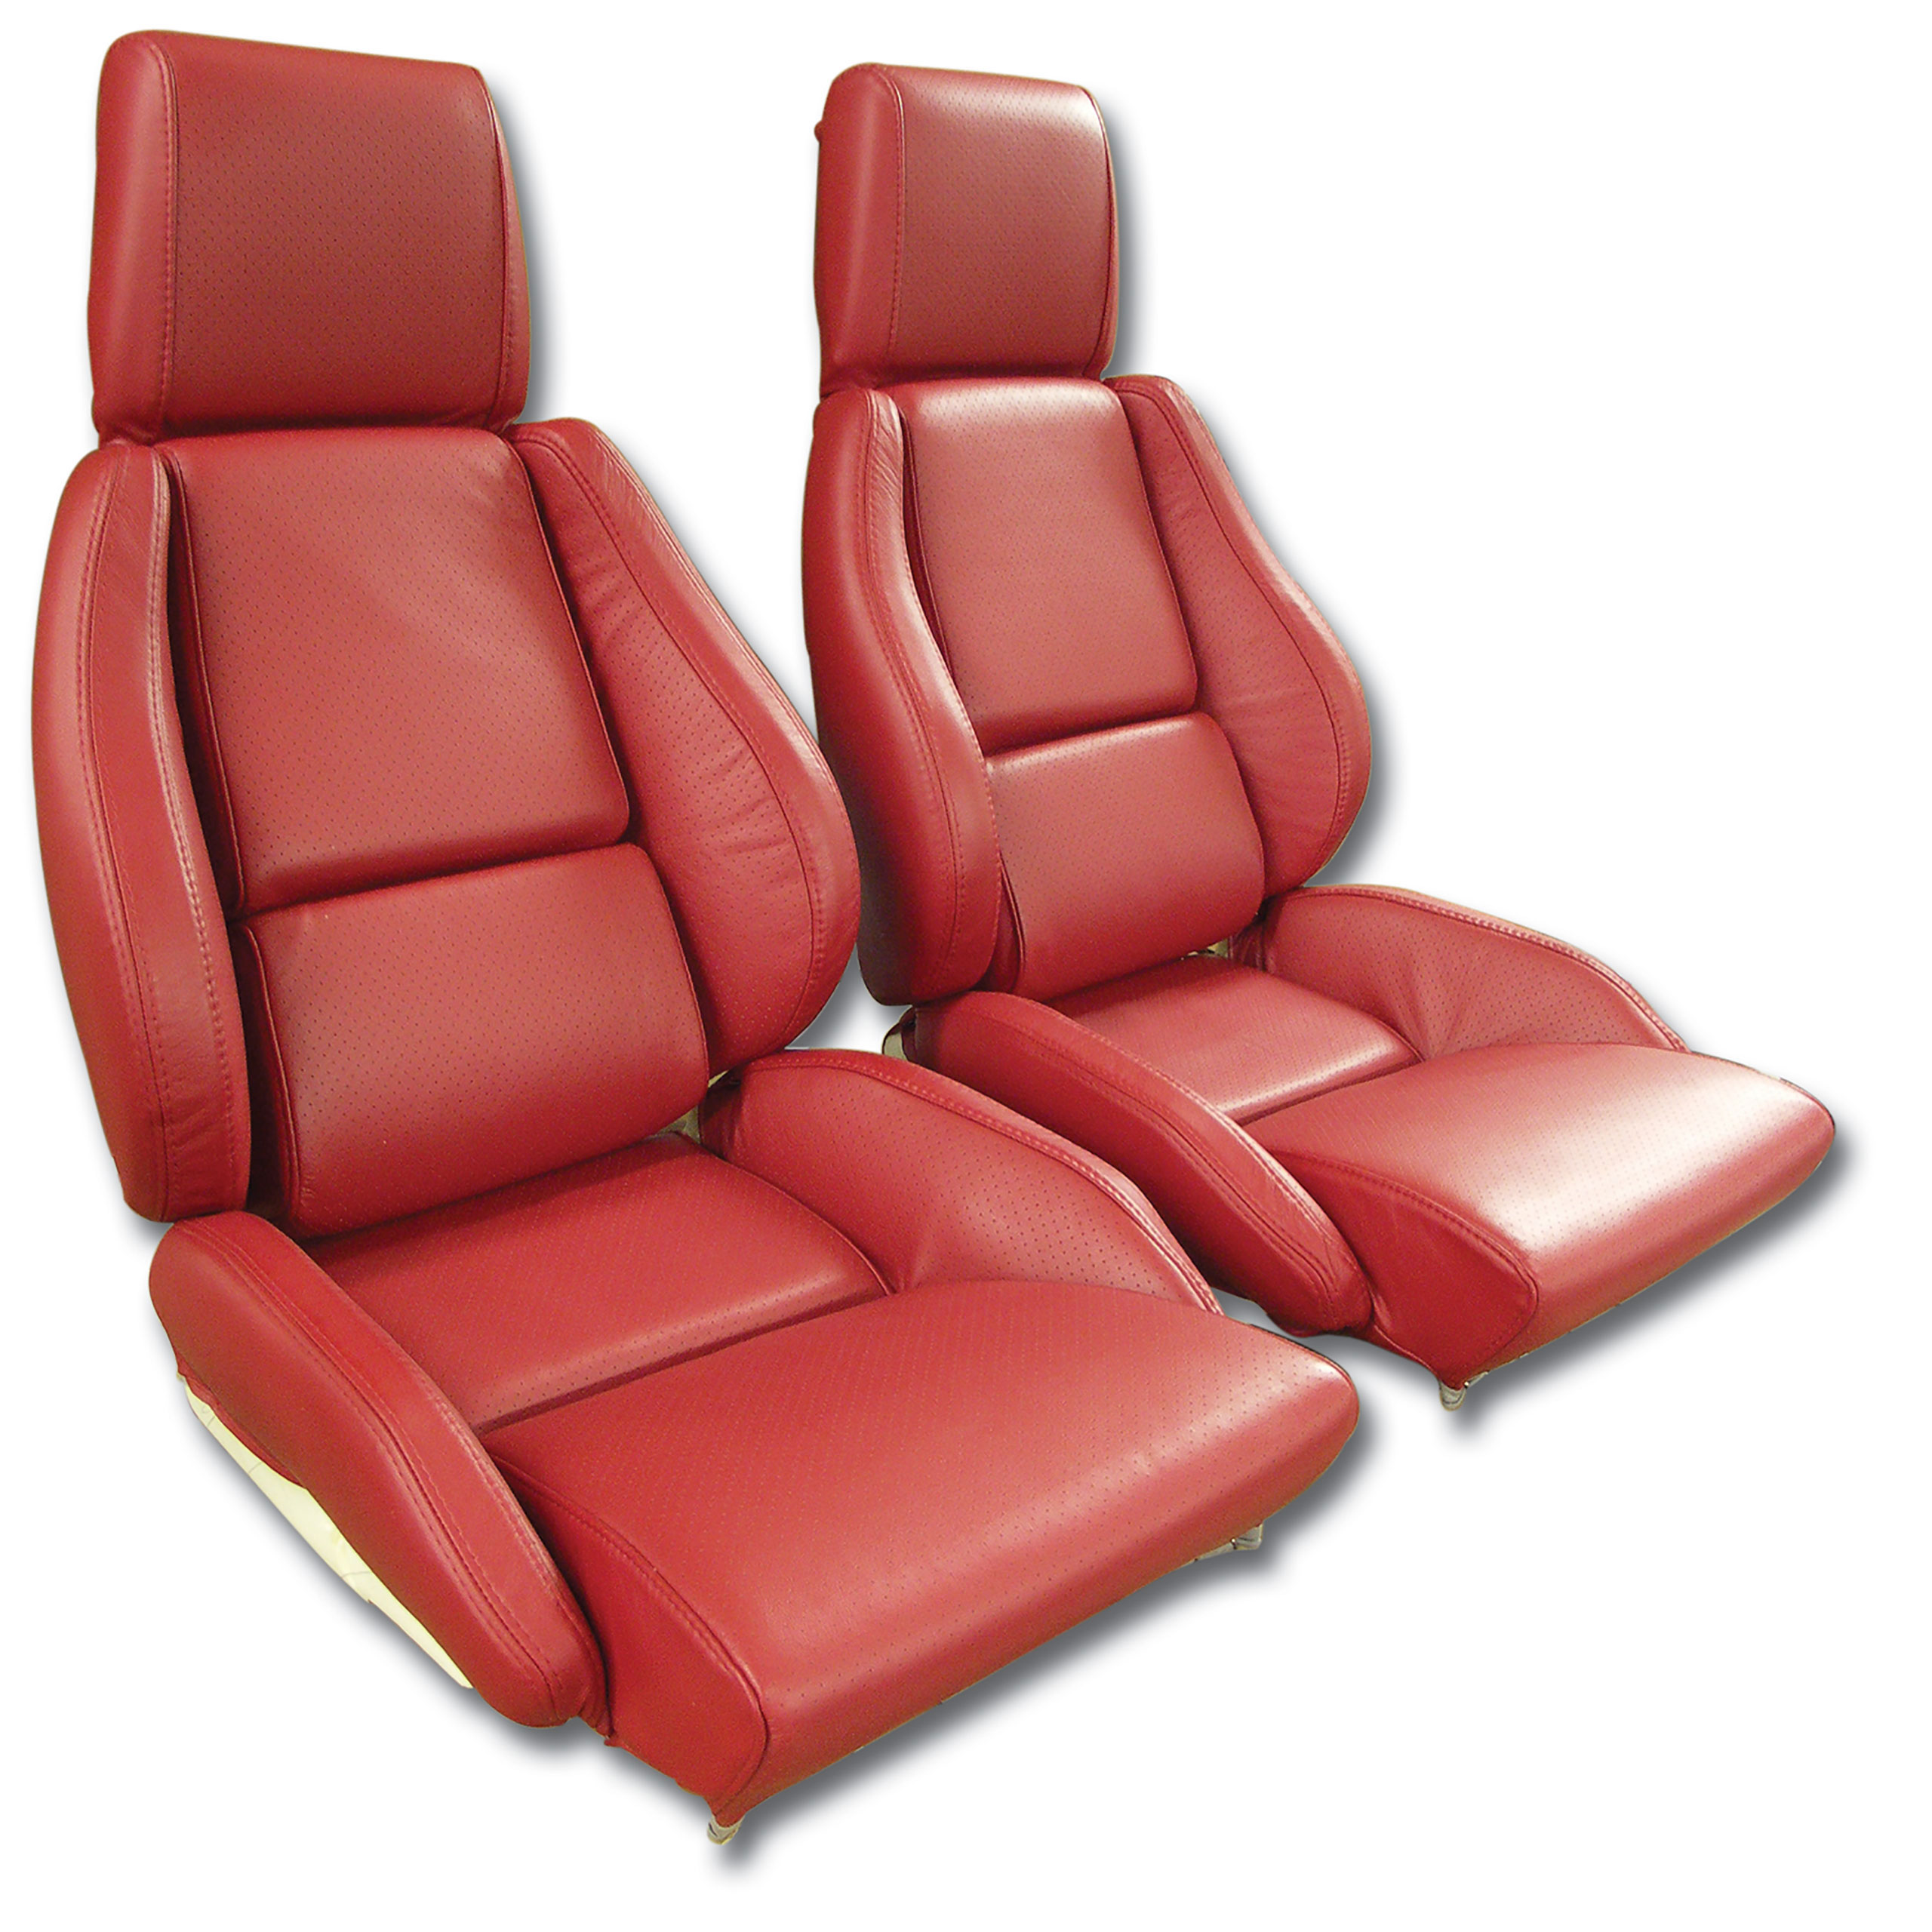 1986-1988 Corvette C4 Leather Seat Covers- Red Standard CA-420375 